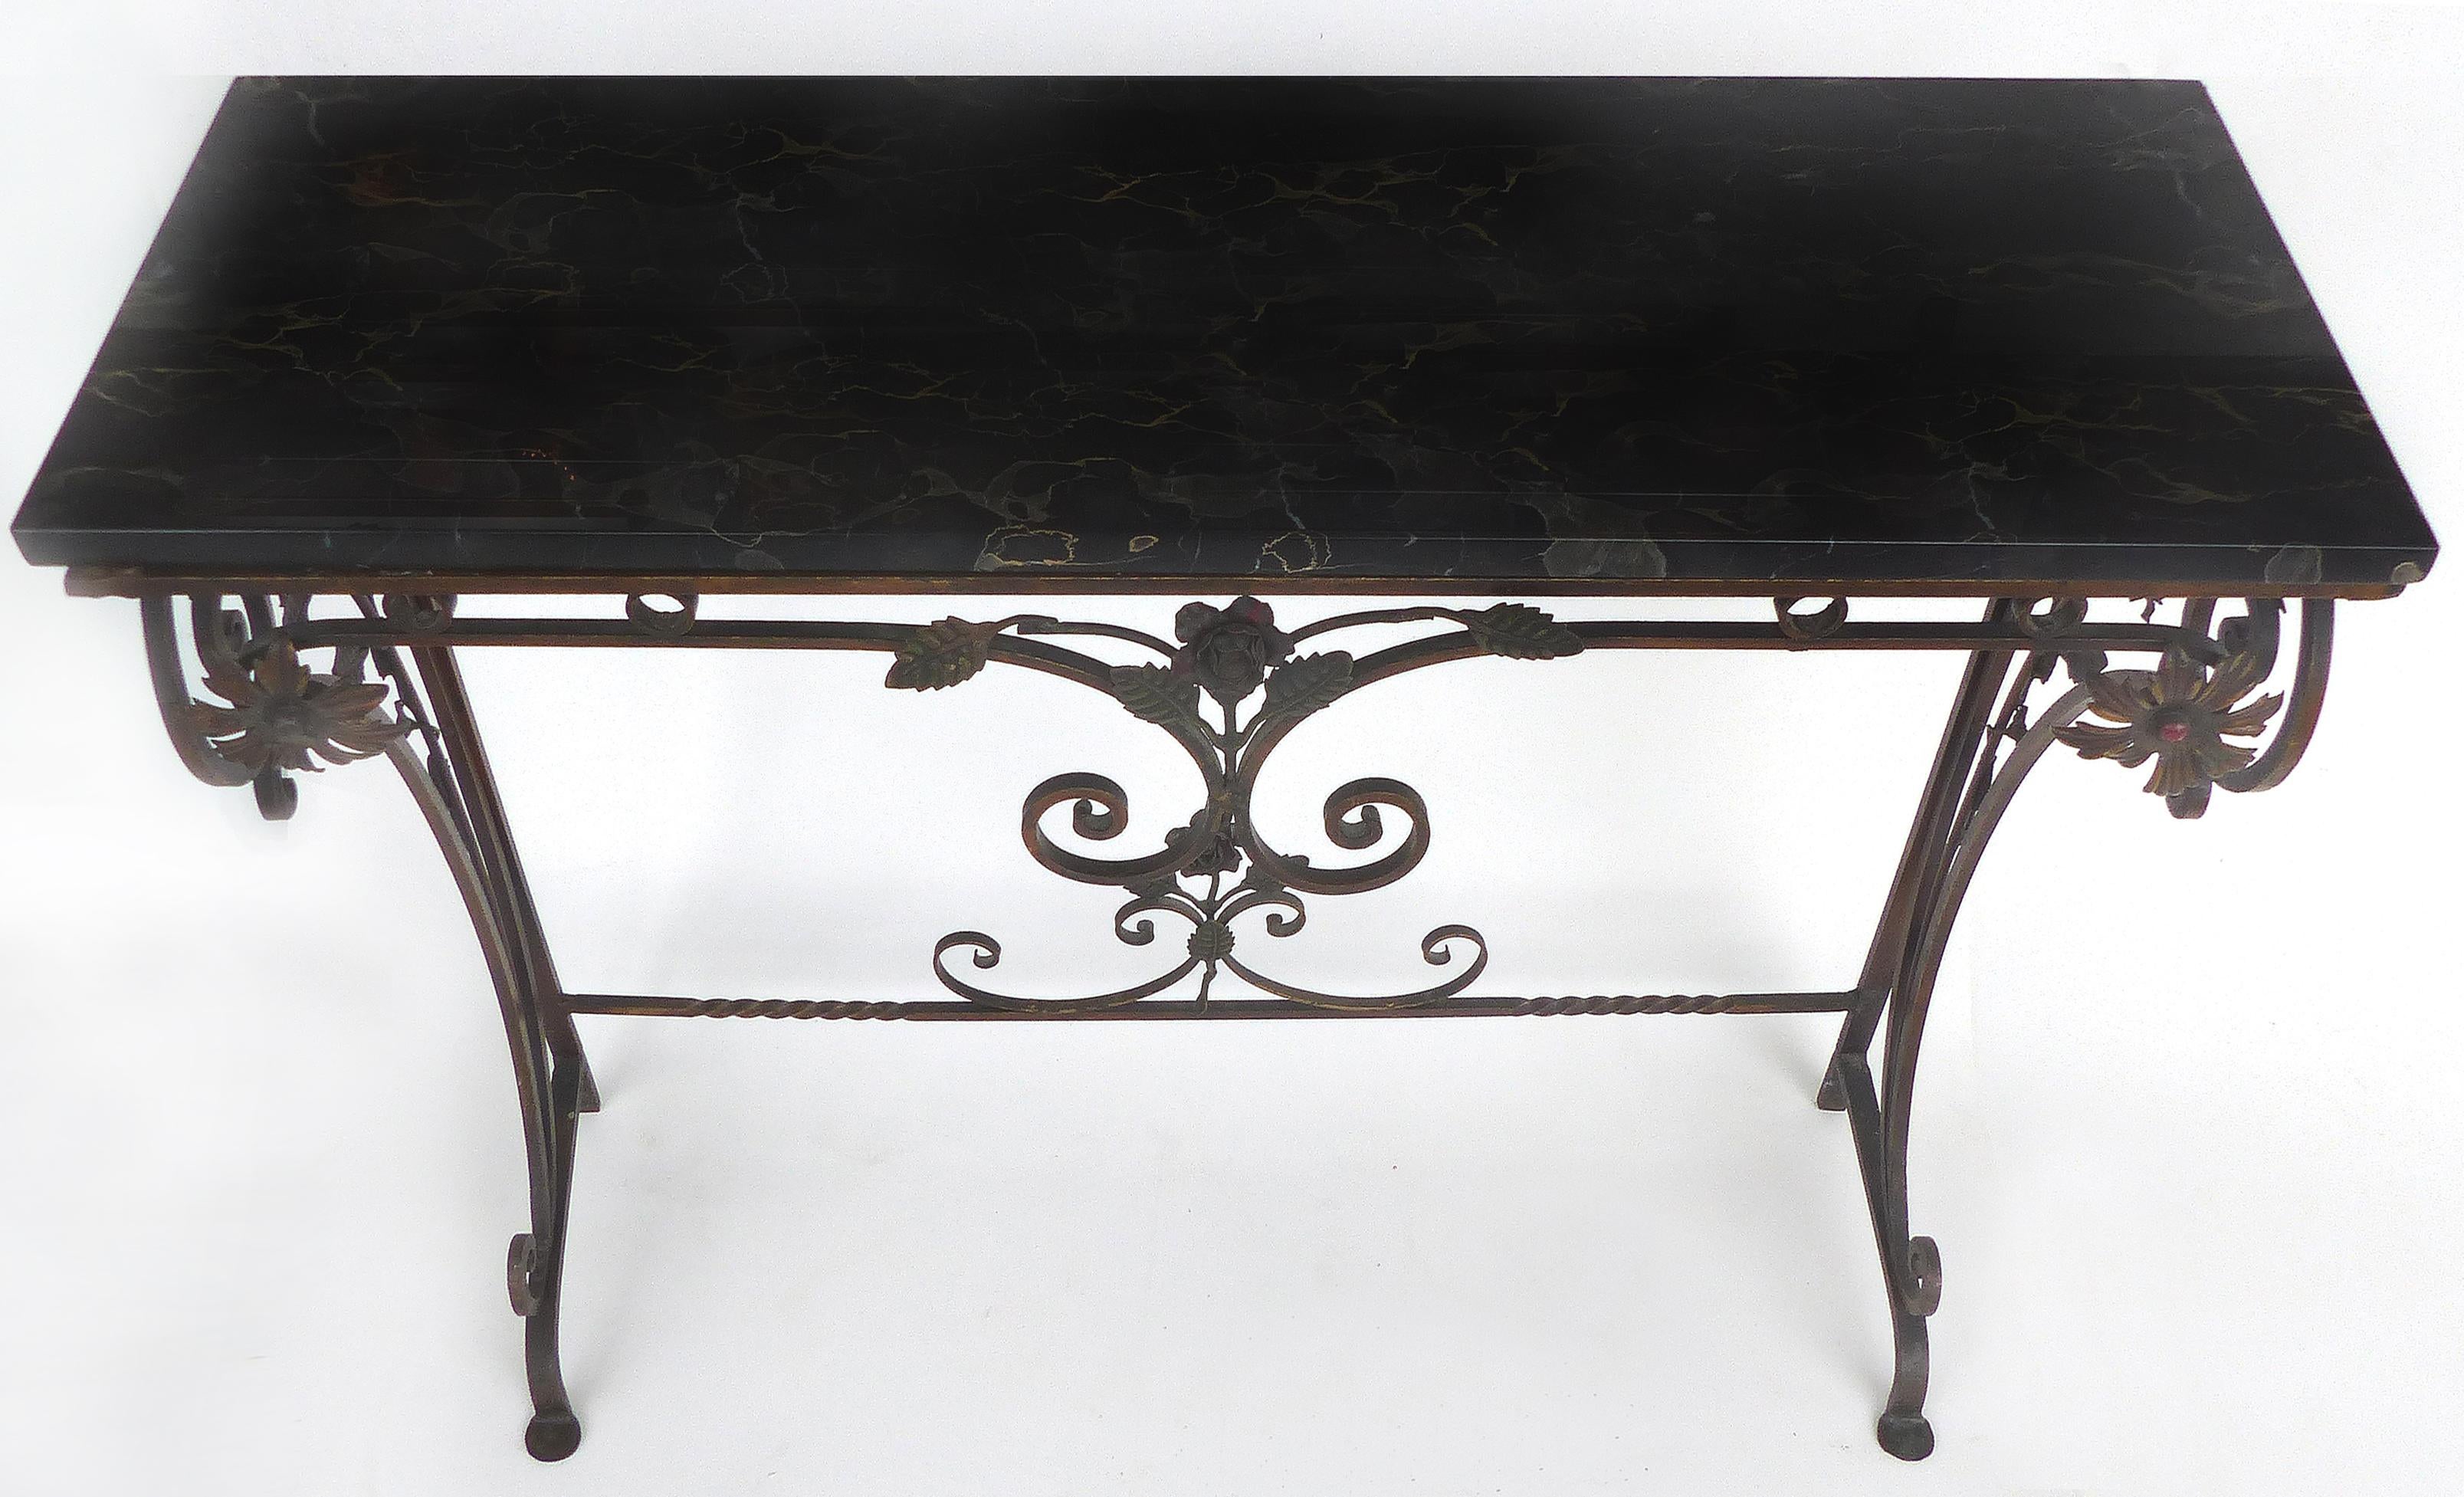 20th Century Italian Art Deco Gilt Iron, Polychromed Marble Top Console with Matching Mirror